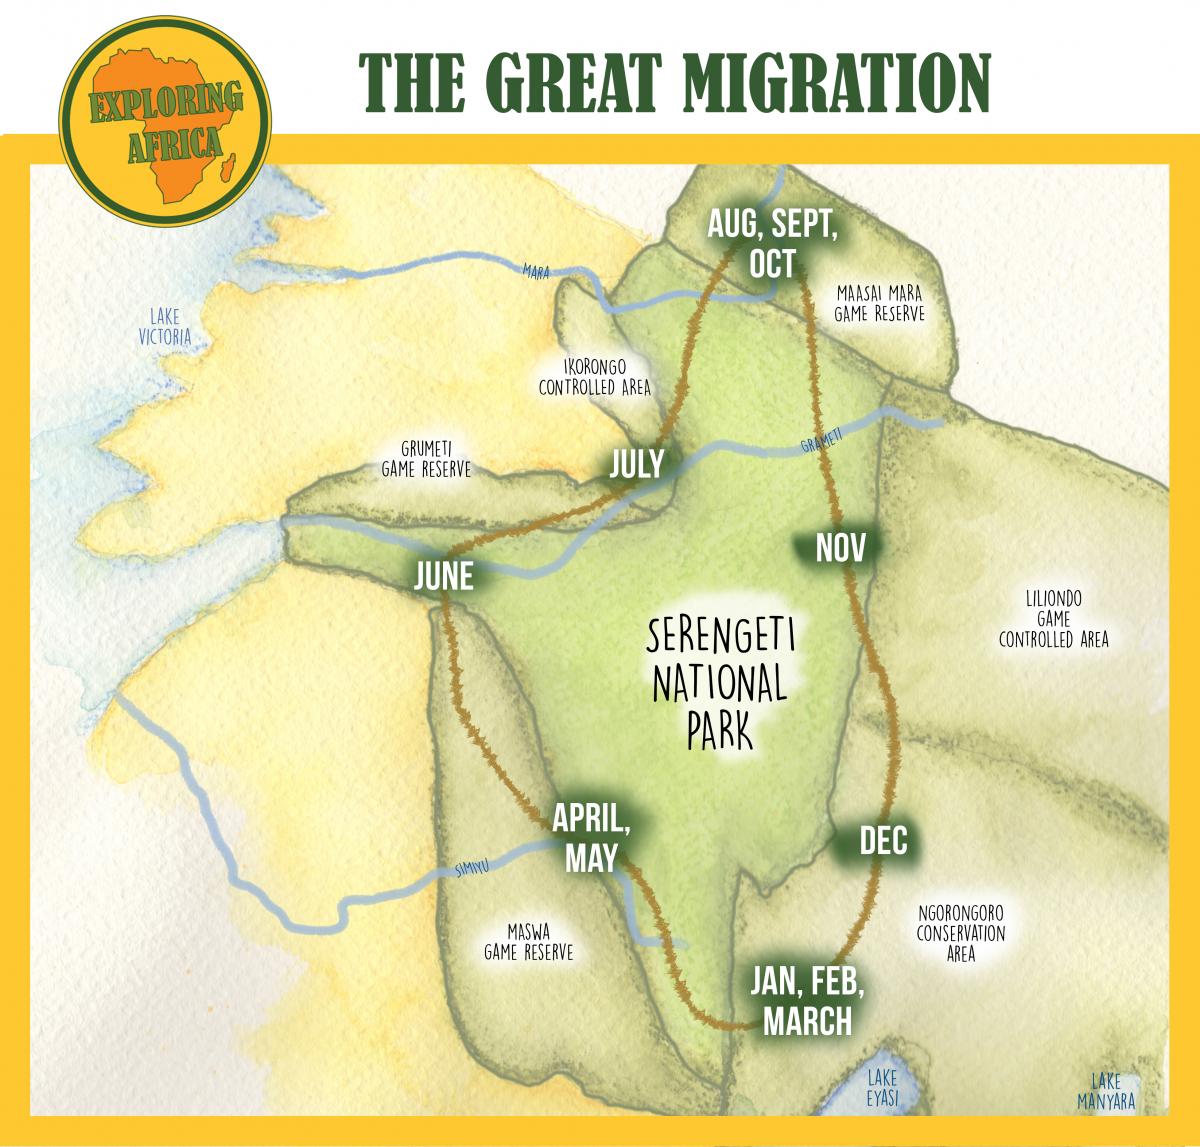 The stages of the Great Migration in Serengeti National Park